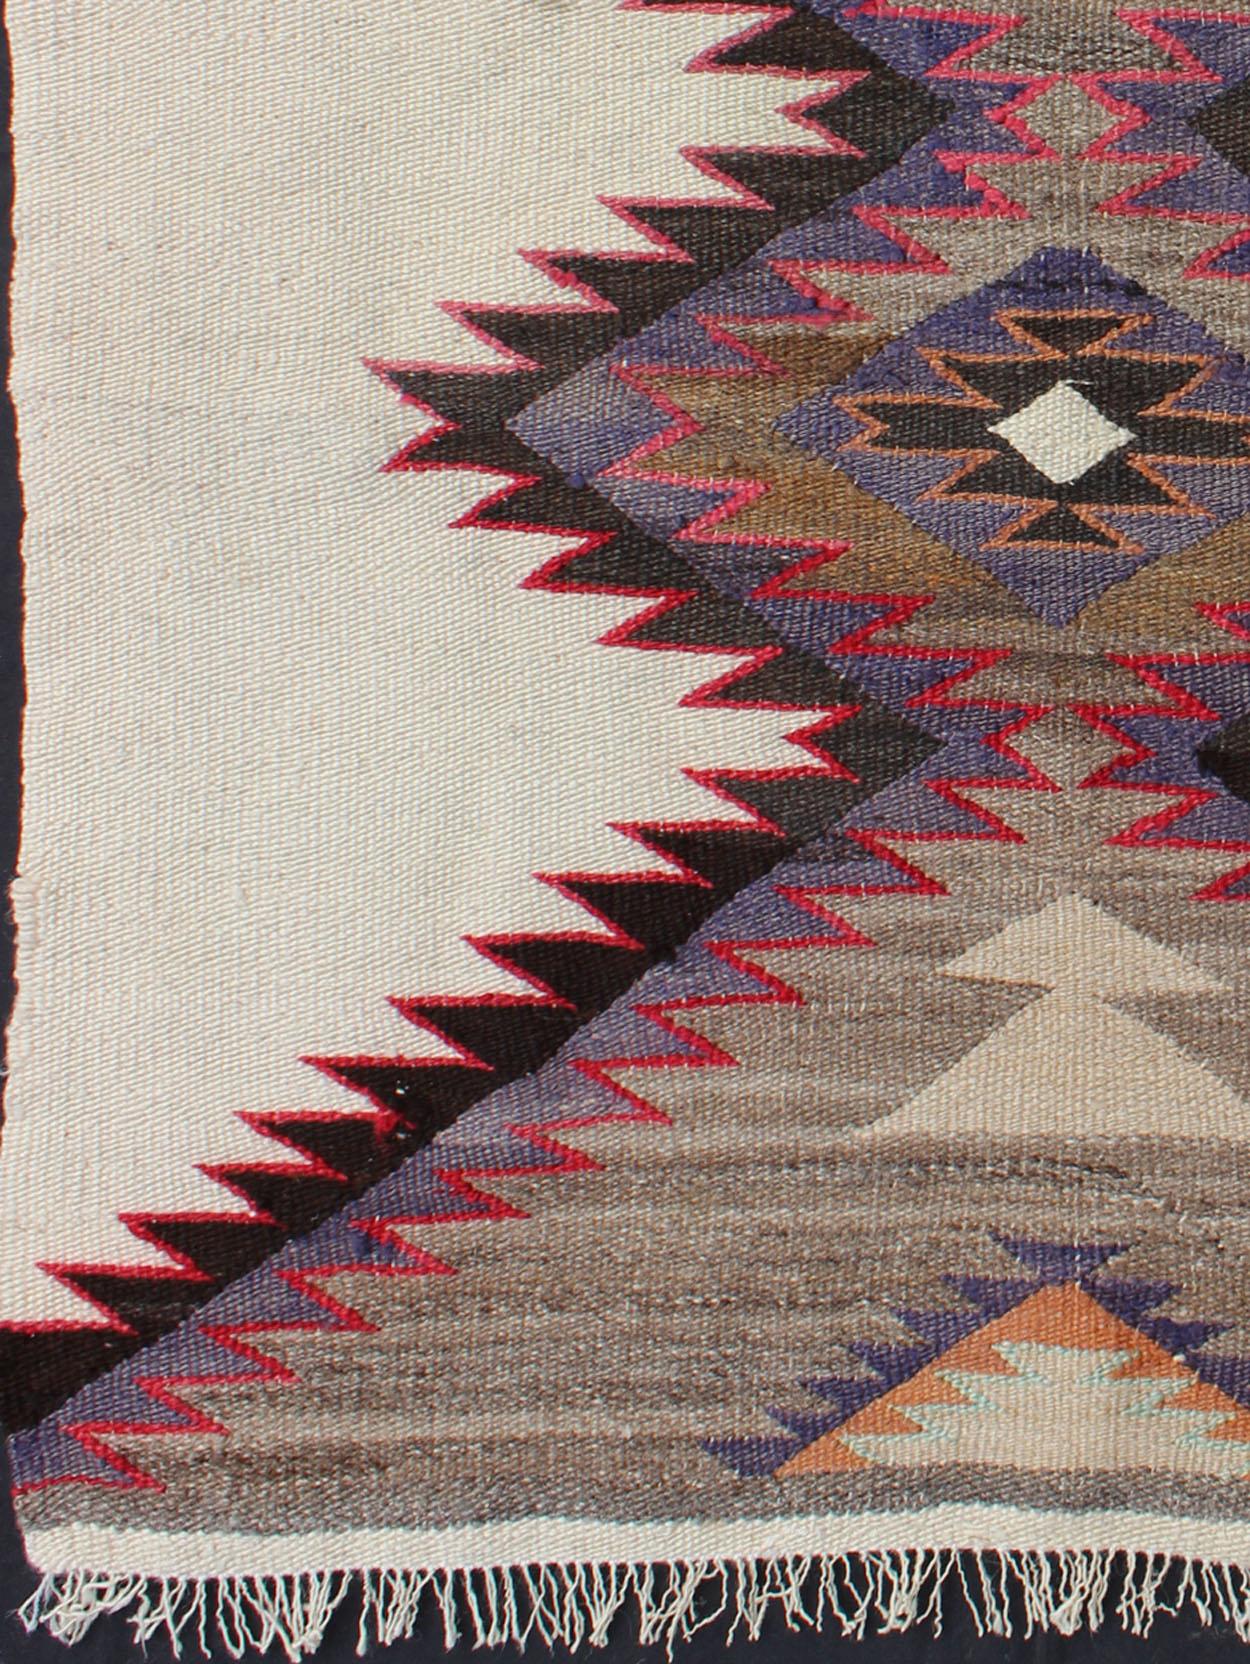 Hand-Woven American Antique Navajo Rug Geometric Design in Ivory, Red, Black and Lavender